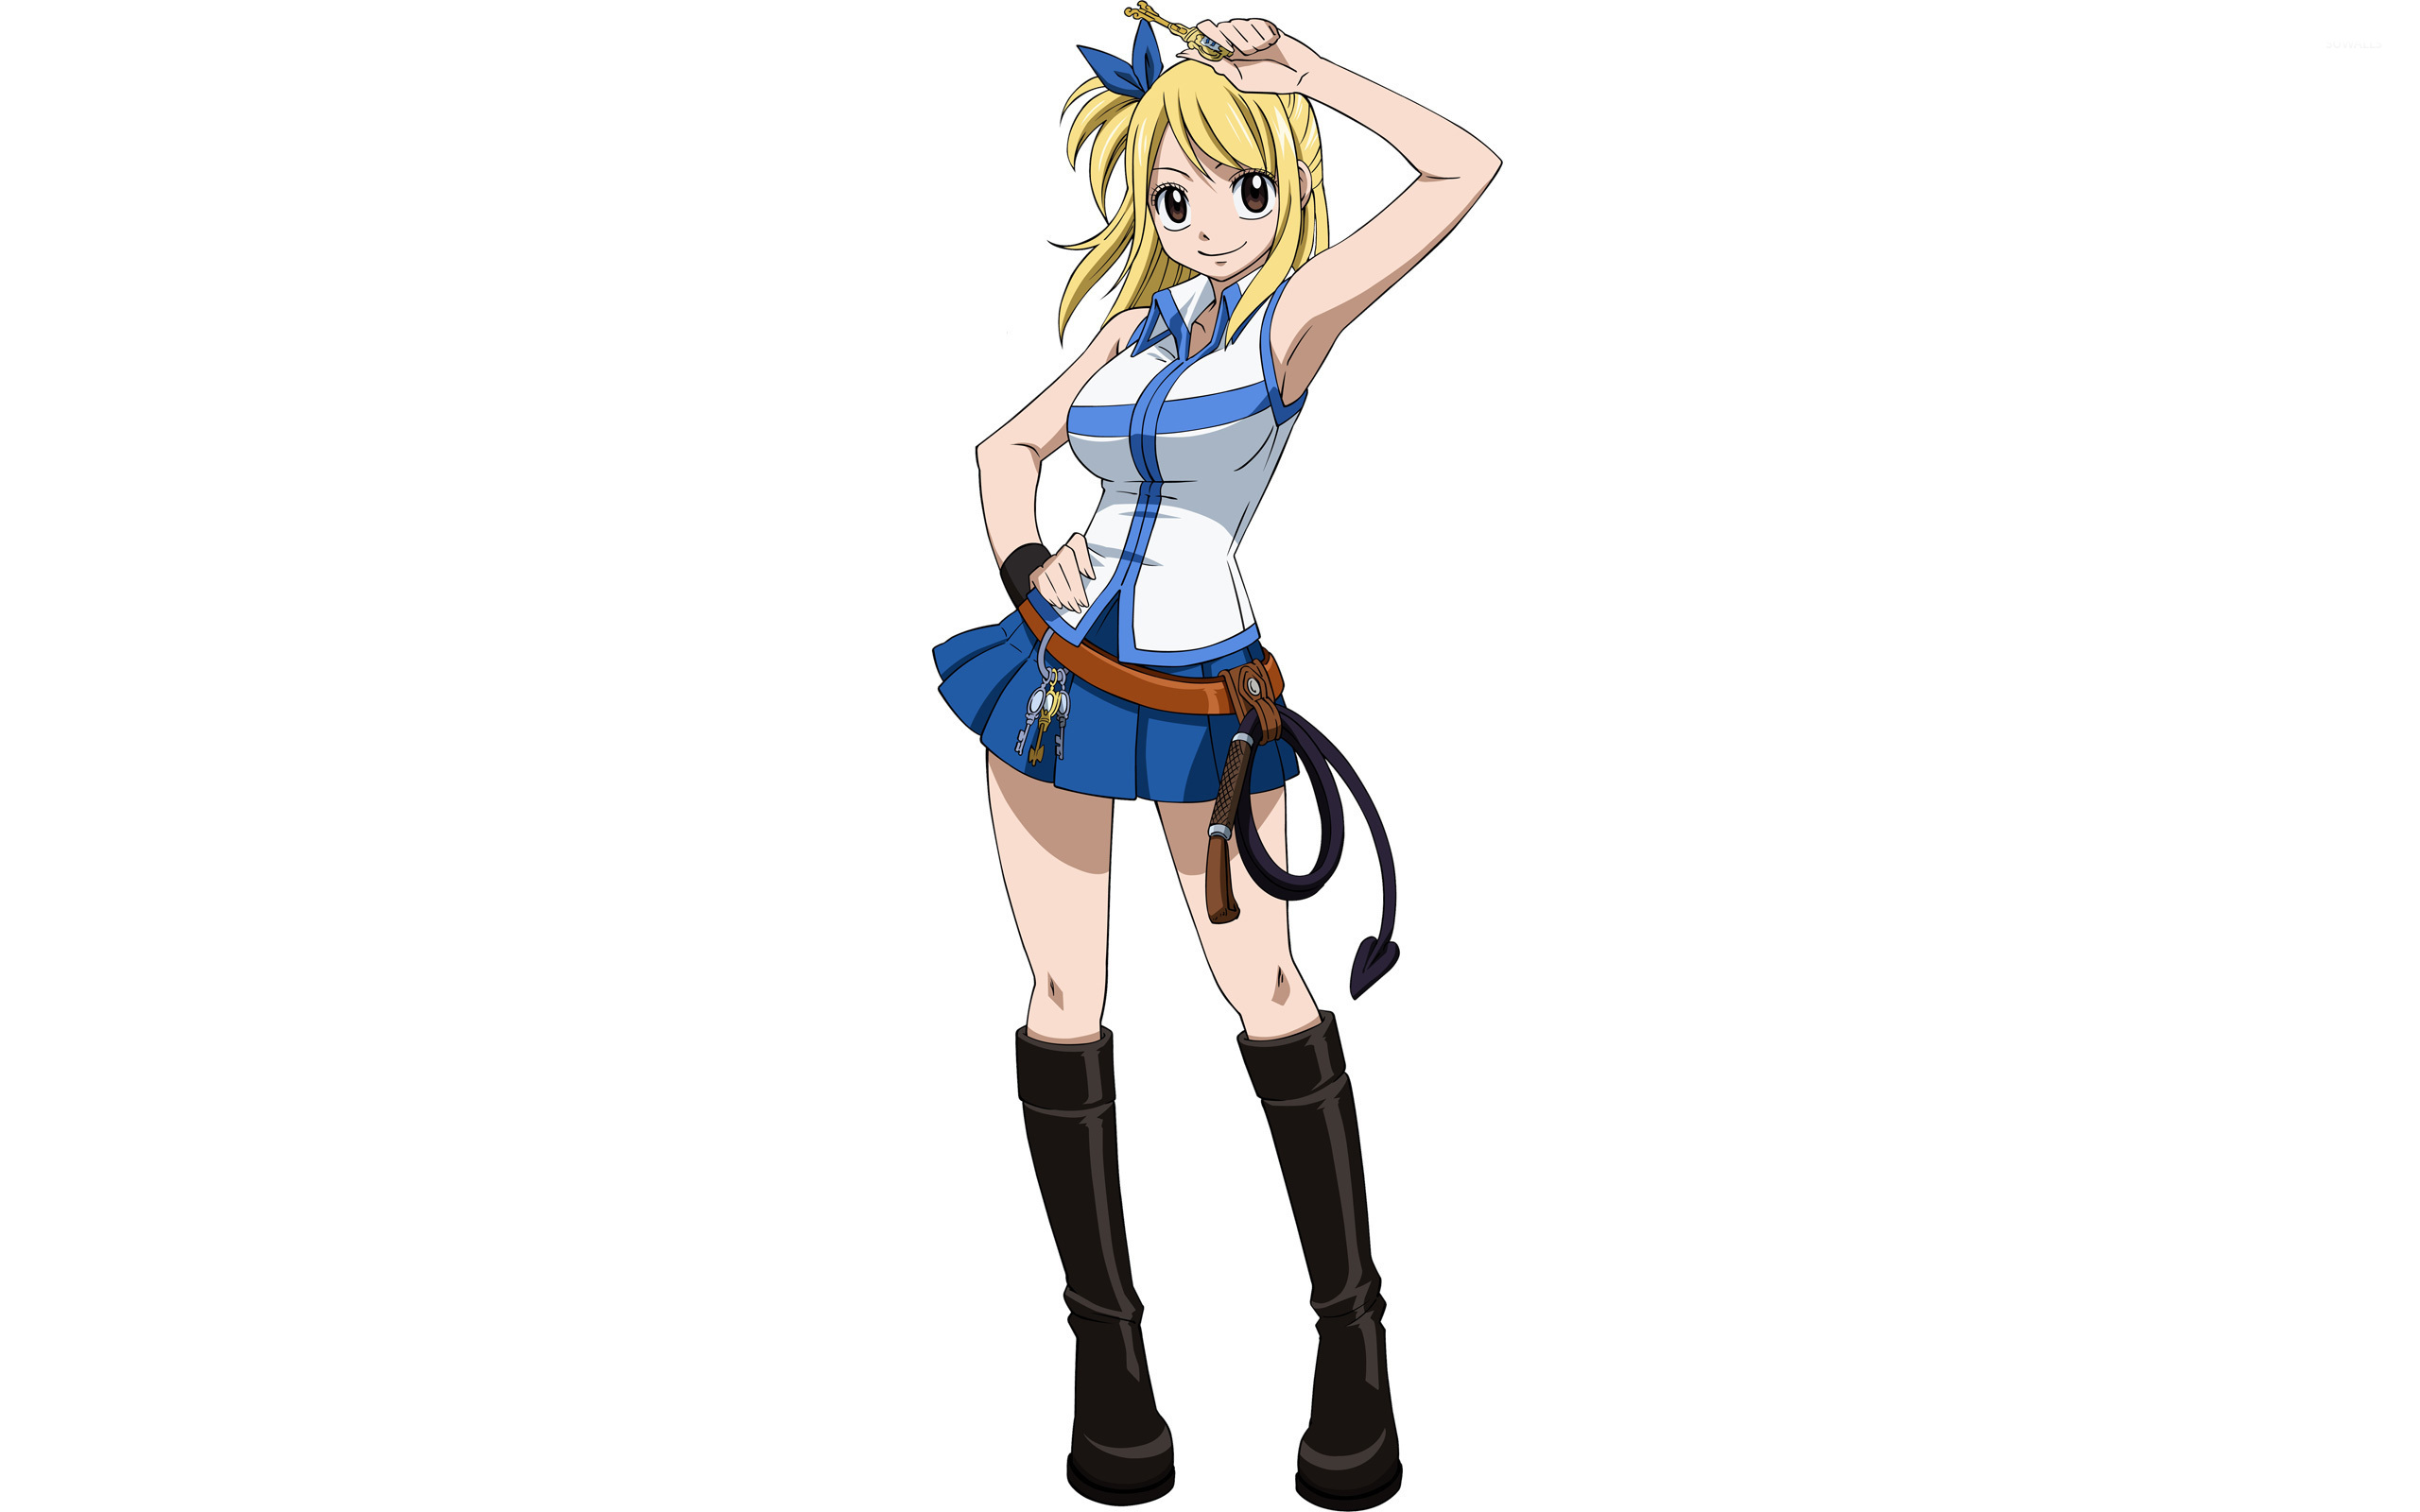 Lucy Heartfilia  Fairy Tail wallpaper  Anime wallpapers  8433